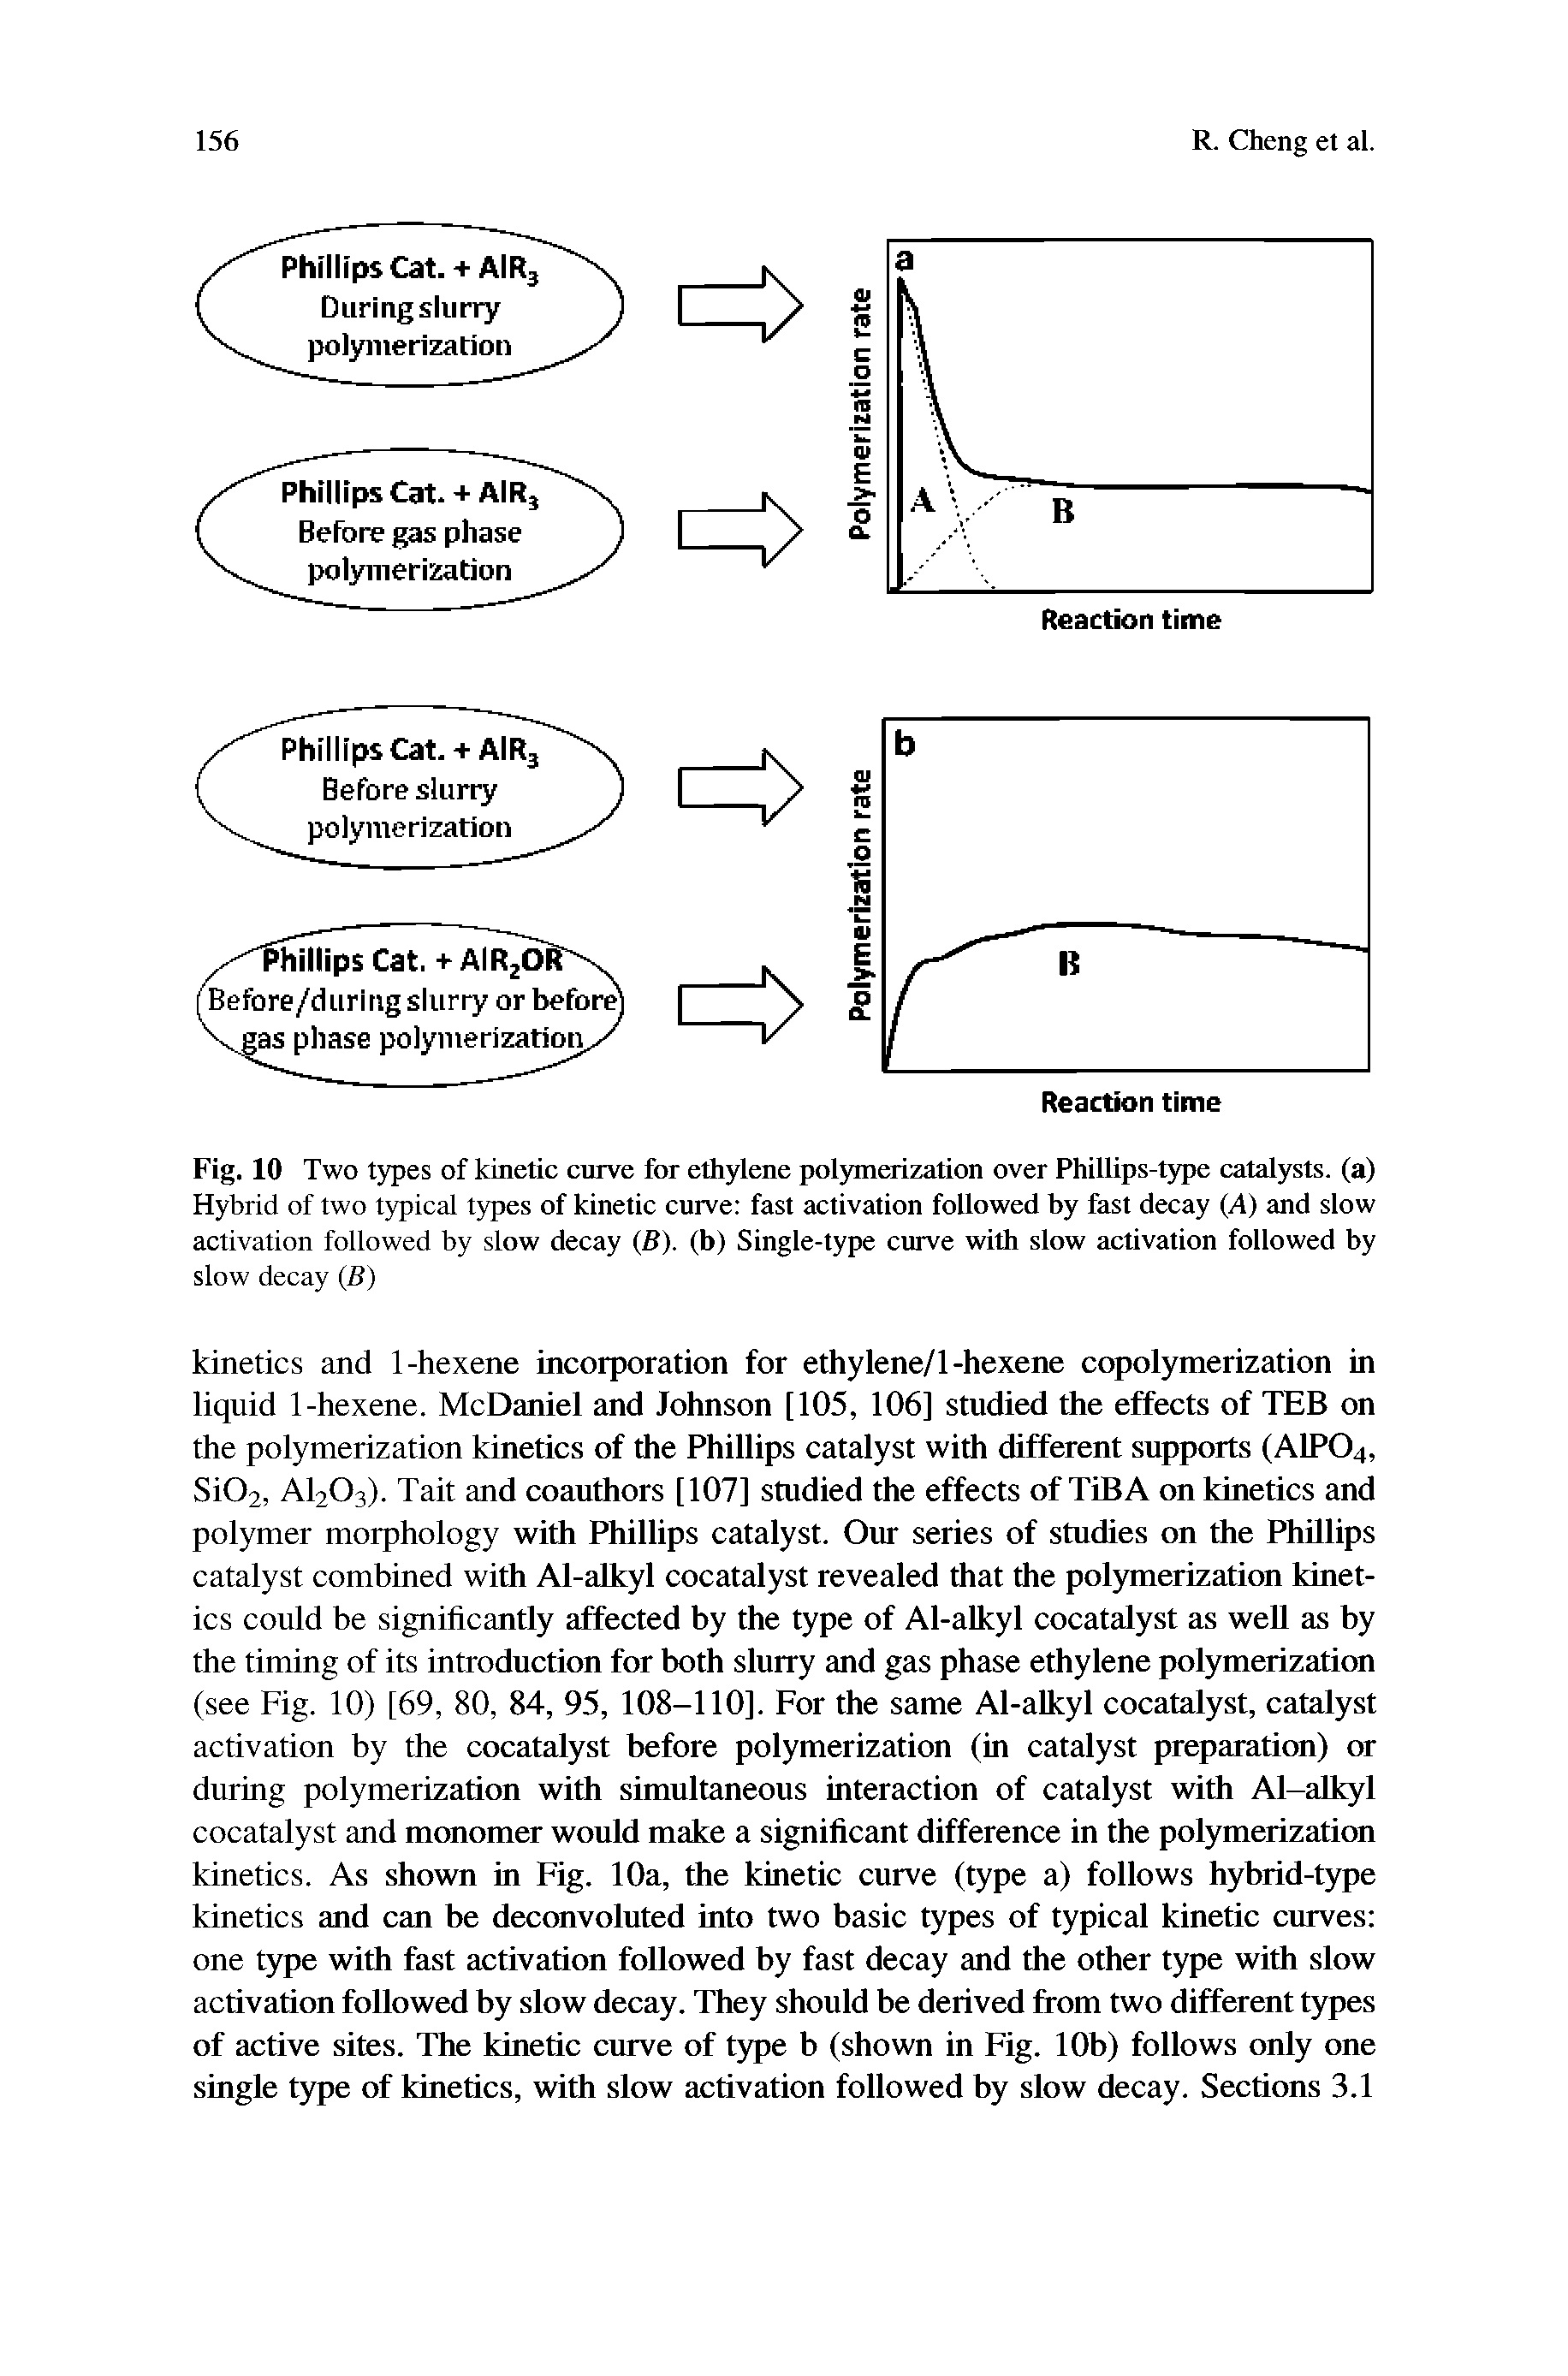 Fig. 10 Two types of kinetic curve for ethylene polymerization over Phillips-type catalysts, (a) Hybrid of two typical types of kinetic curve fast activation followed by fast decay (A) and slow activation followed by slow decay (B). (b) Single-type curve with slow activation followed by...